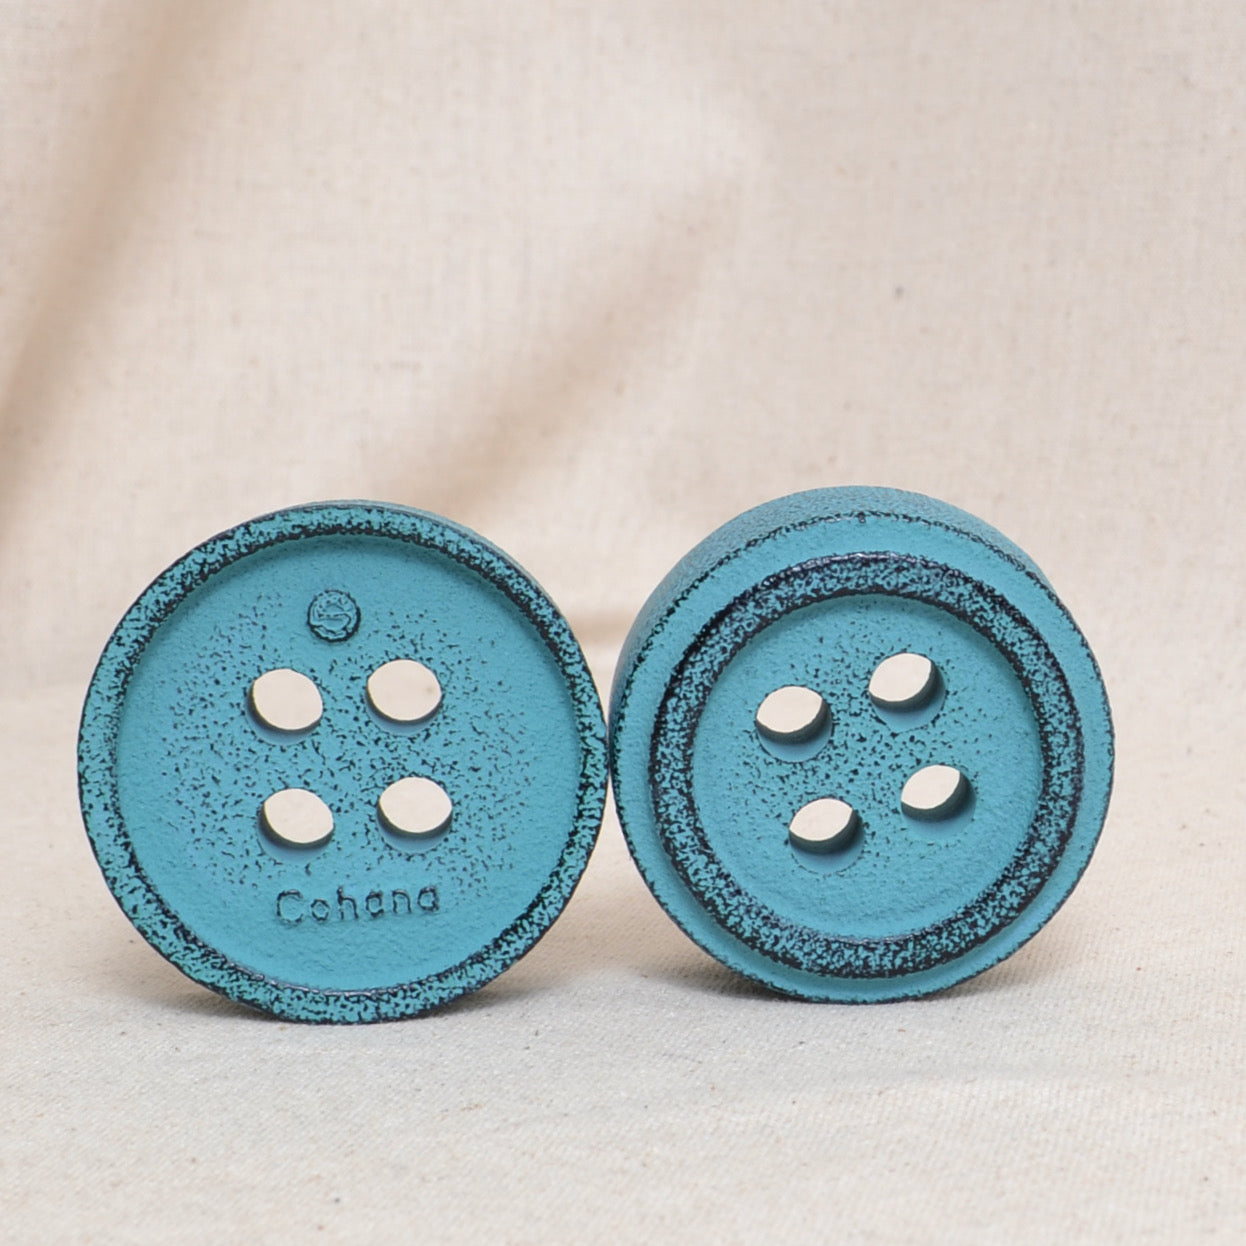 Cohana paperweight button motif, showing back and front